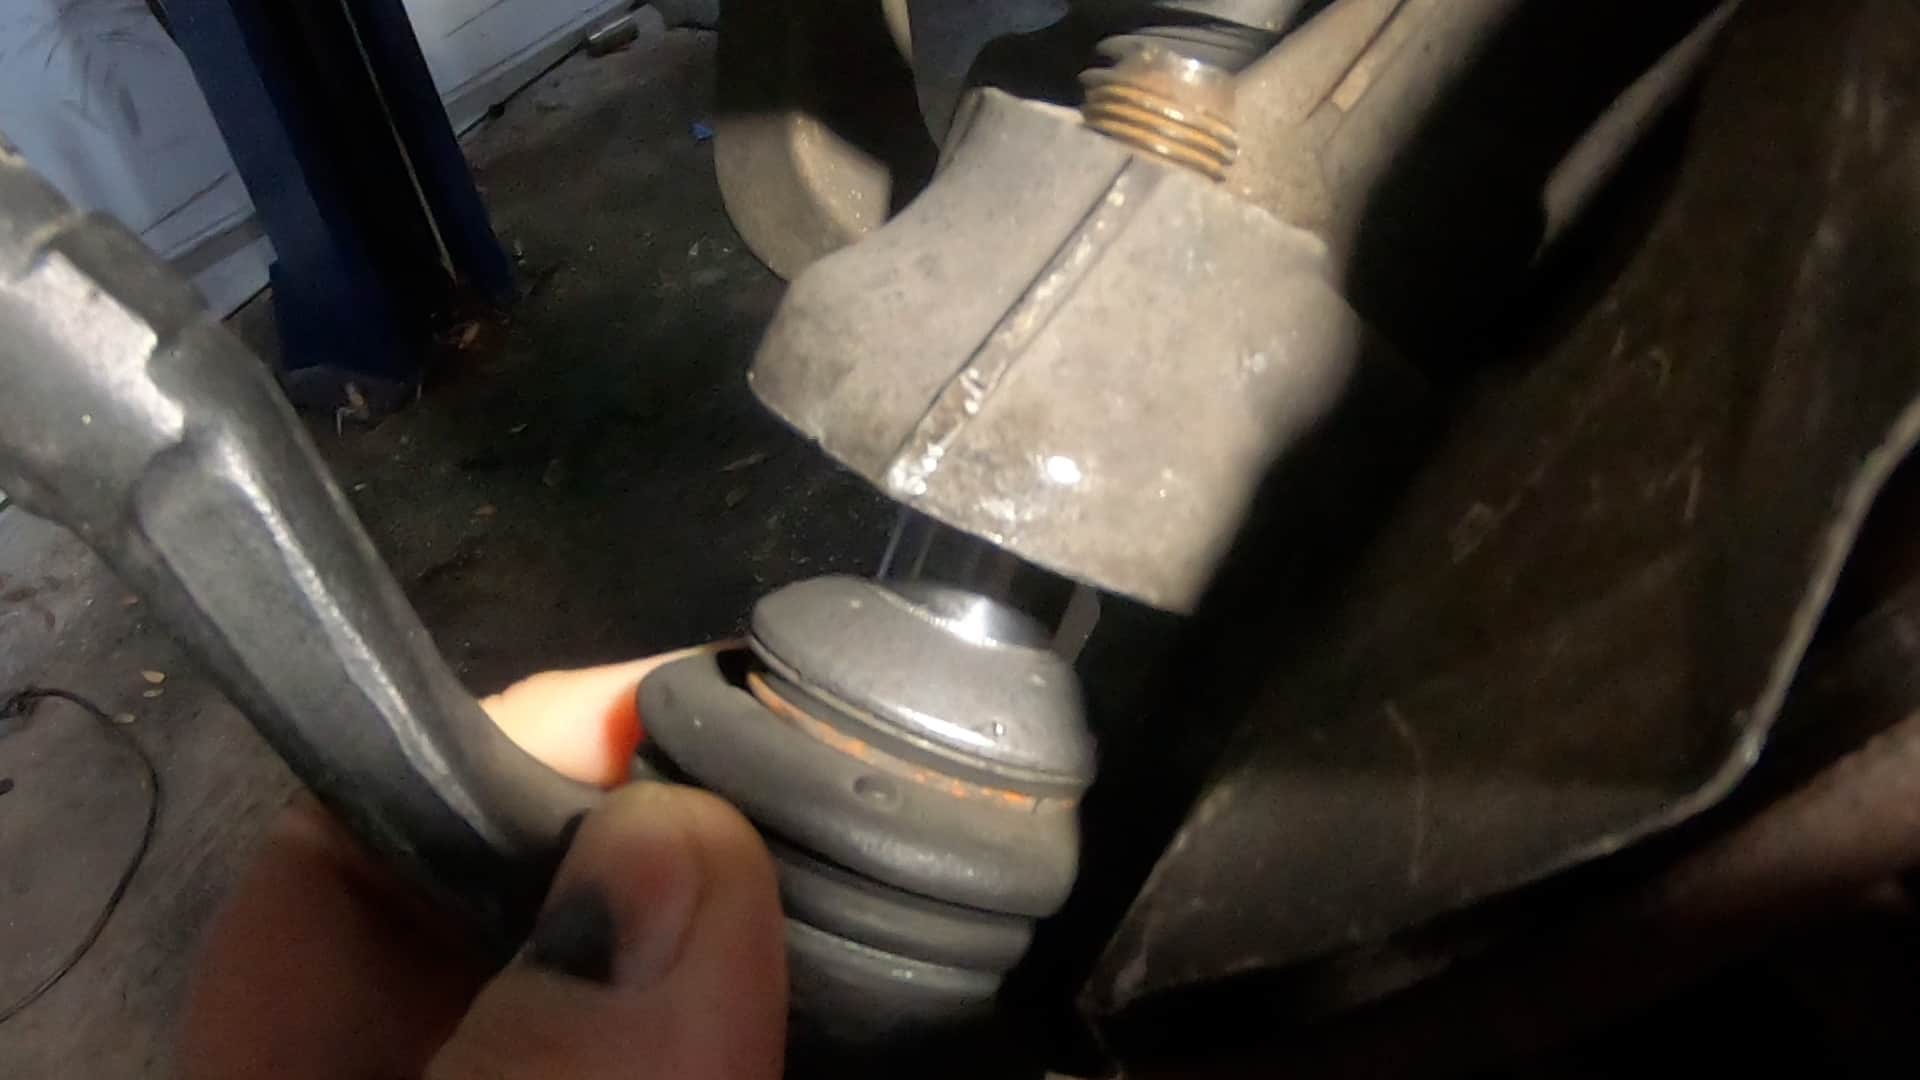 bmw e90 front strut replacement - Remove the tie rod ball joint from the steering knuckle